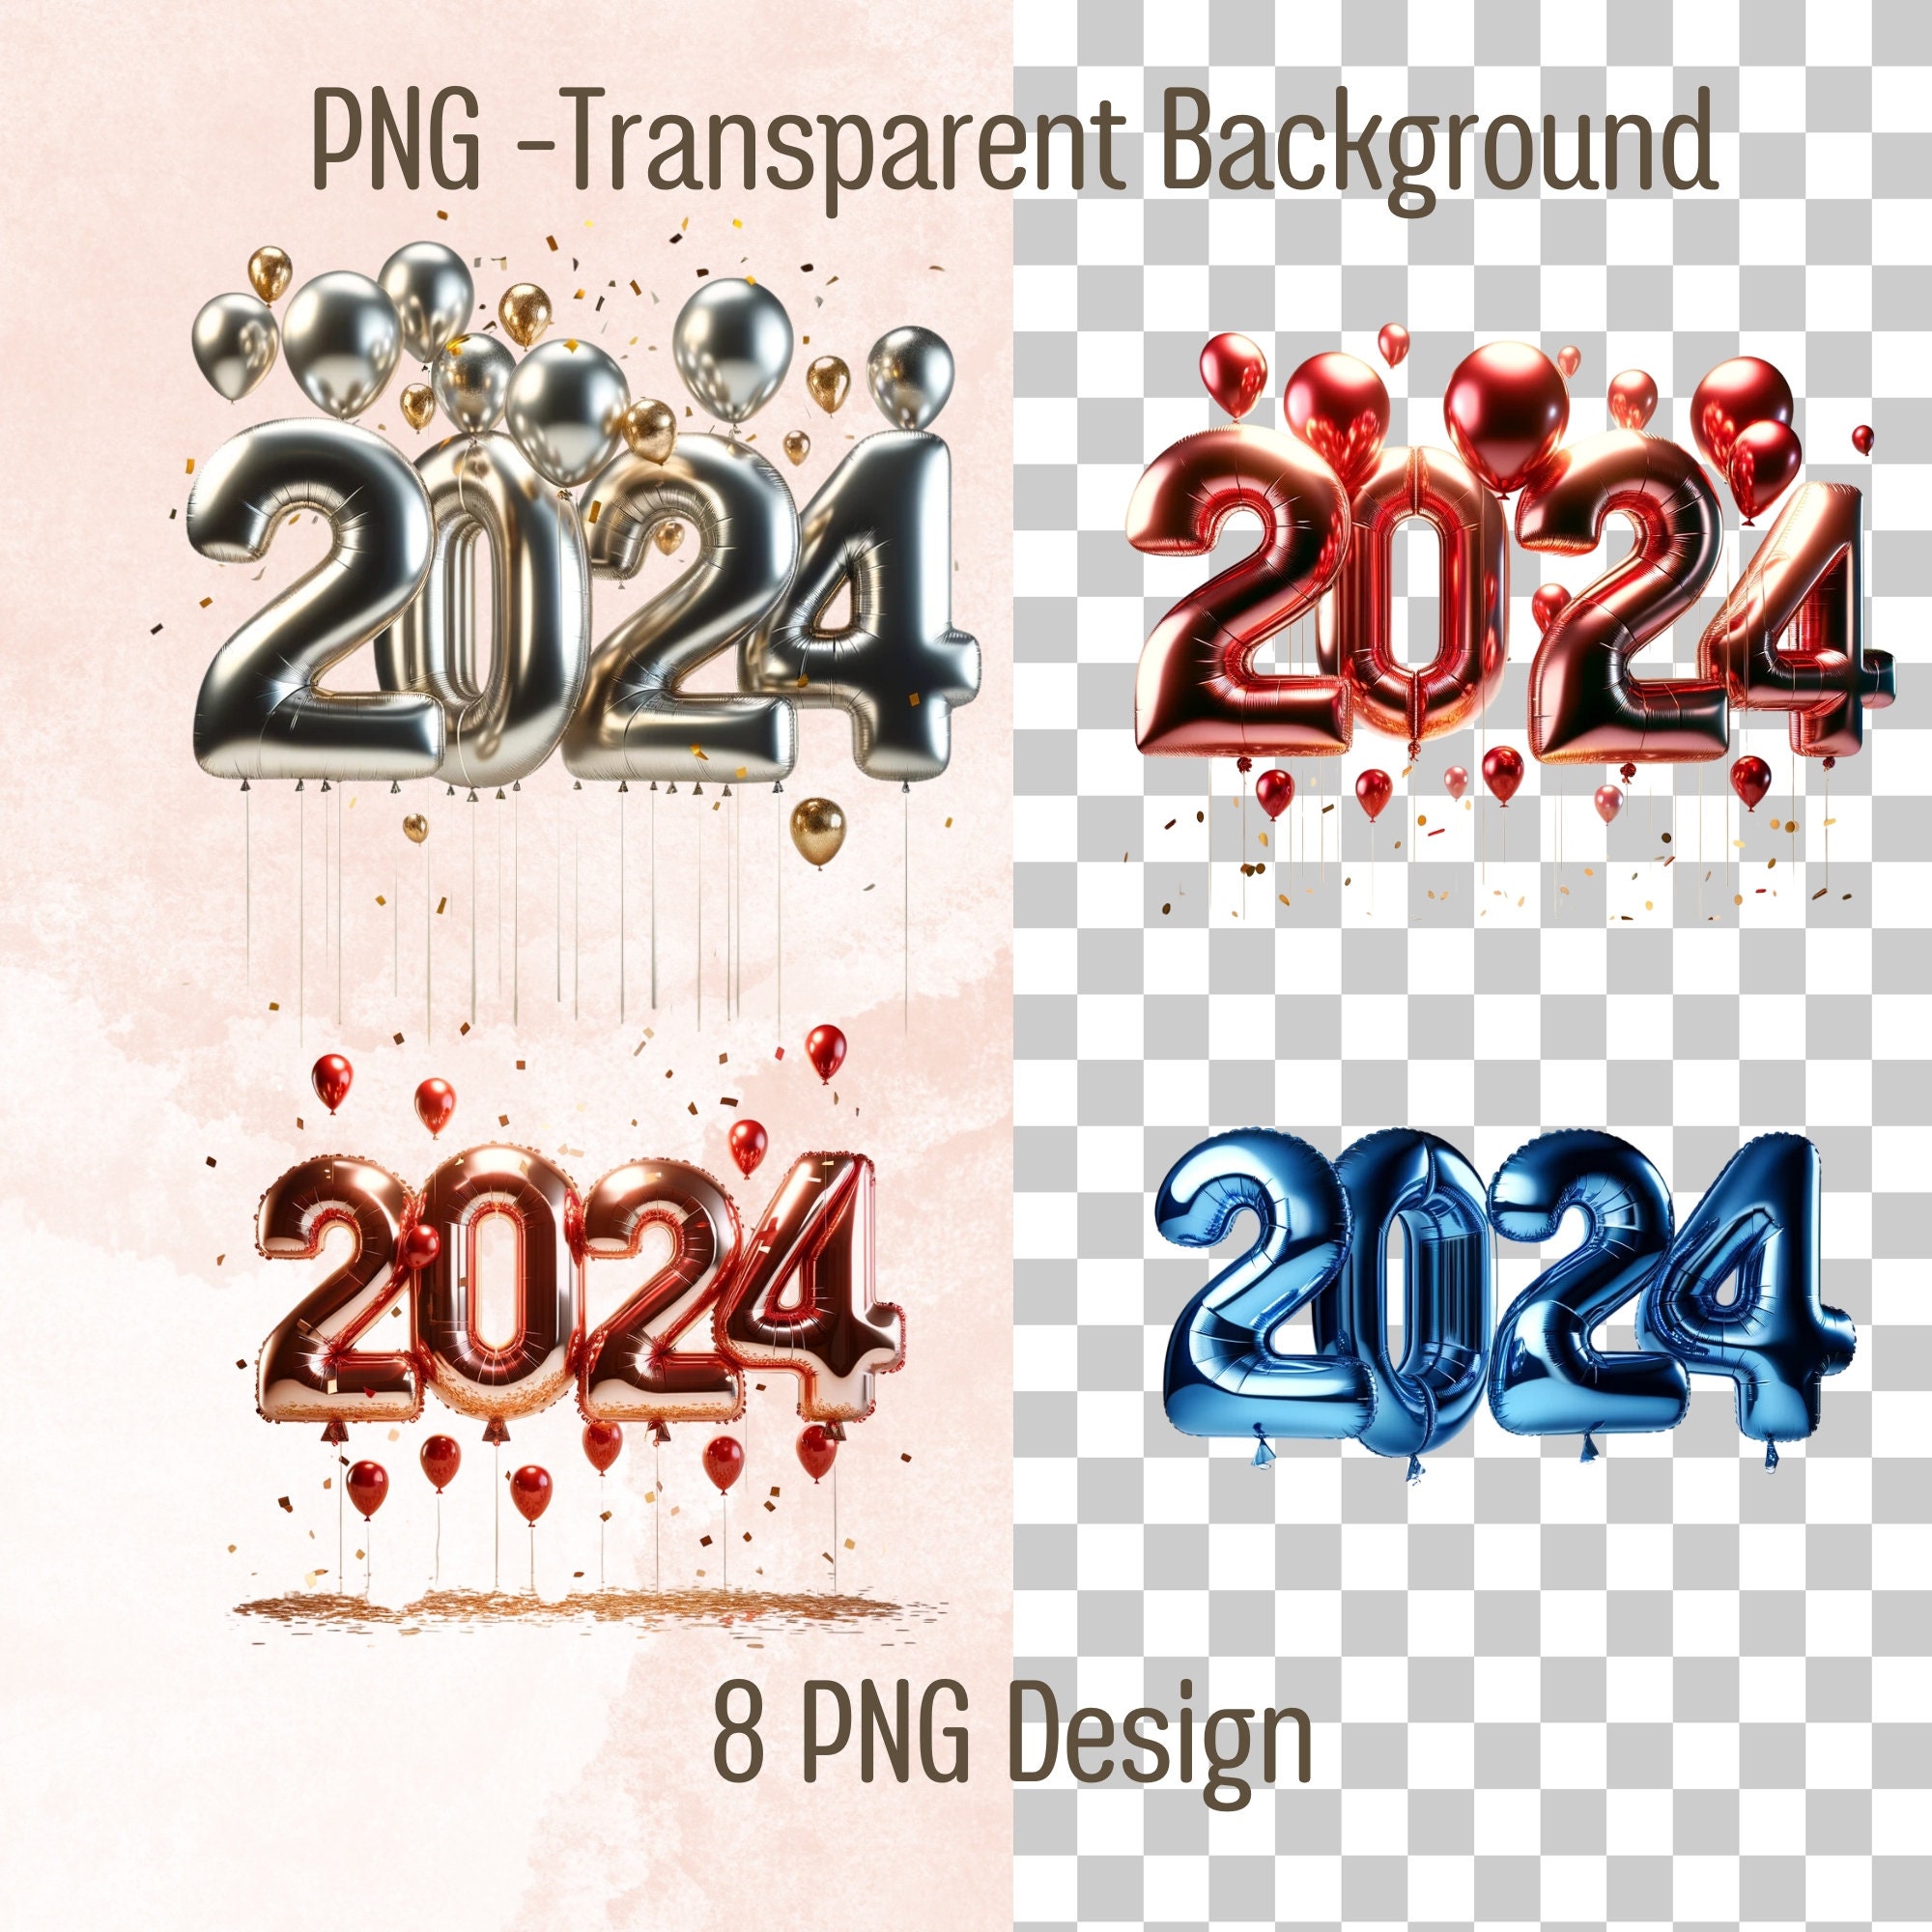 2024 Year Balloons Clipart for Presentations and Designs